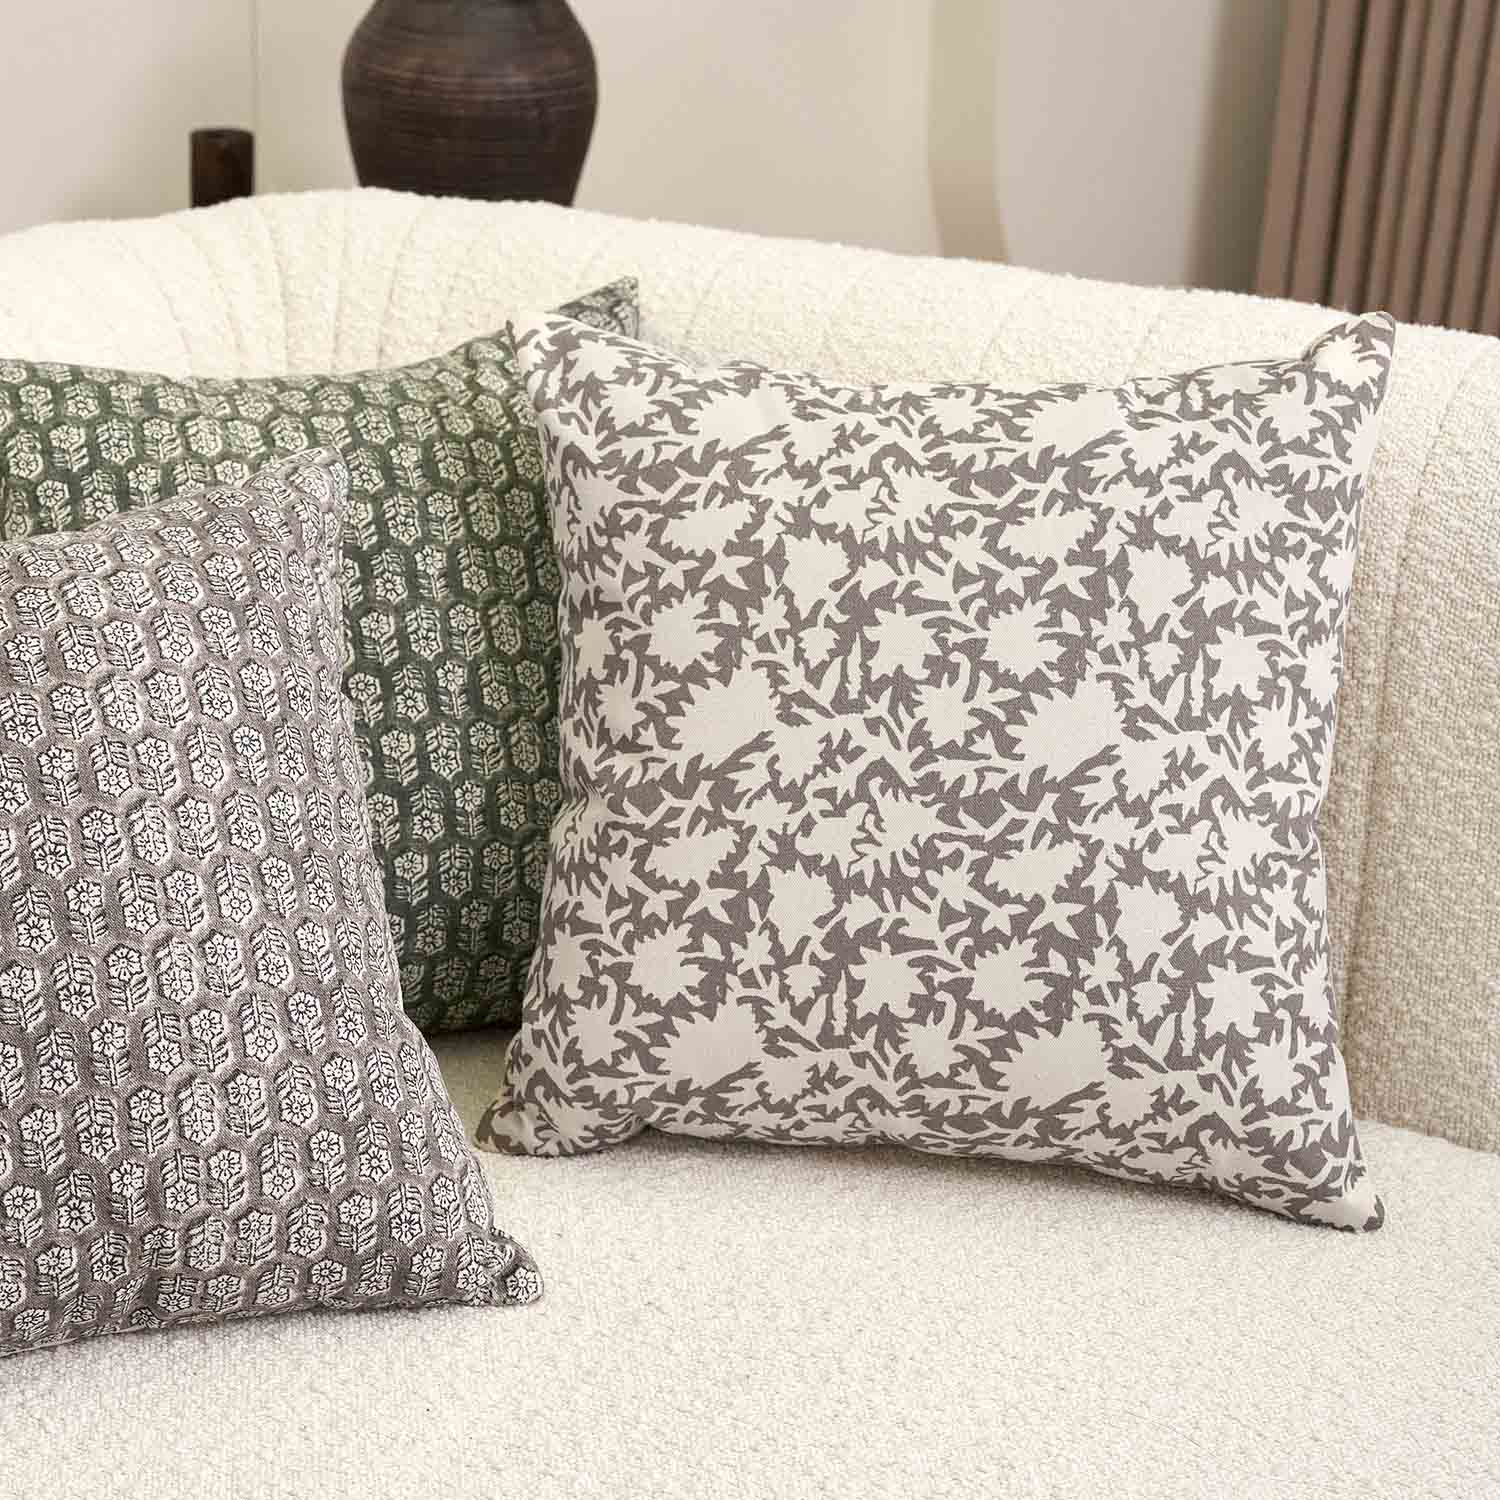 Modena Delicate Floral Print Pillow Cover-